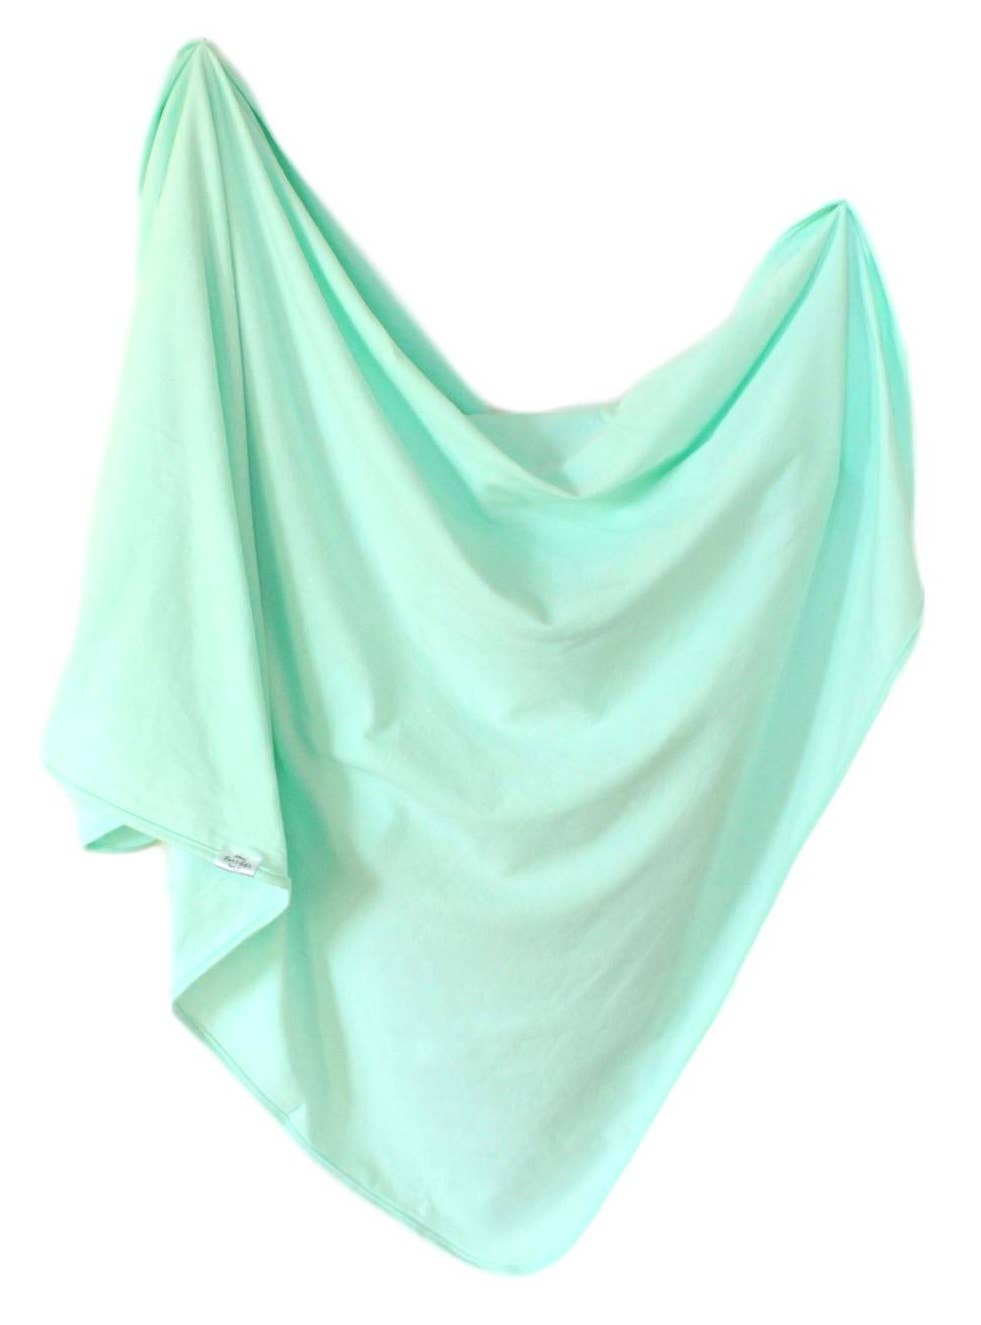 Fawn & Foster - Organic Cotton Swaddle - Mint